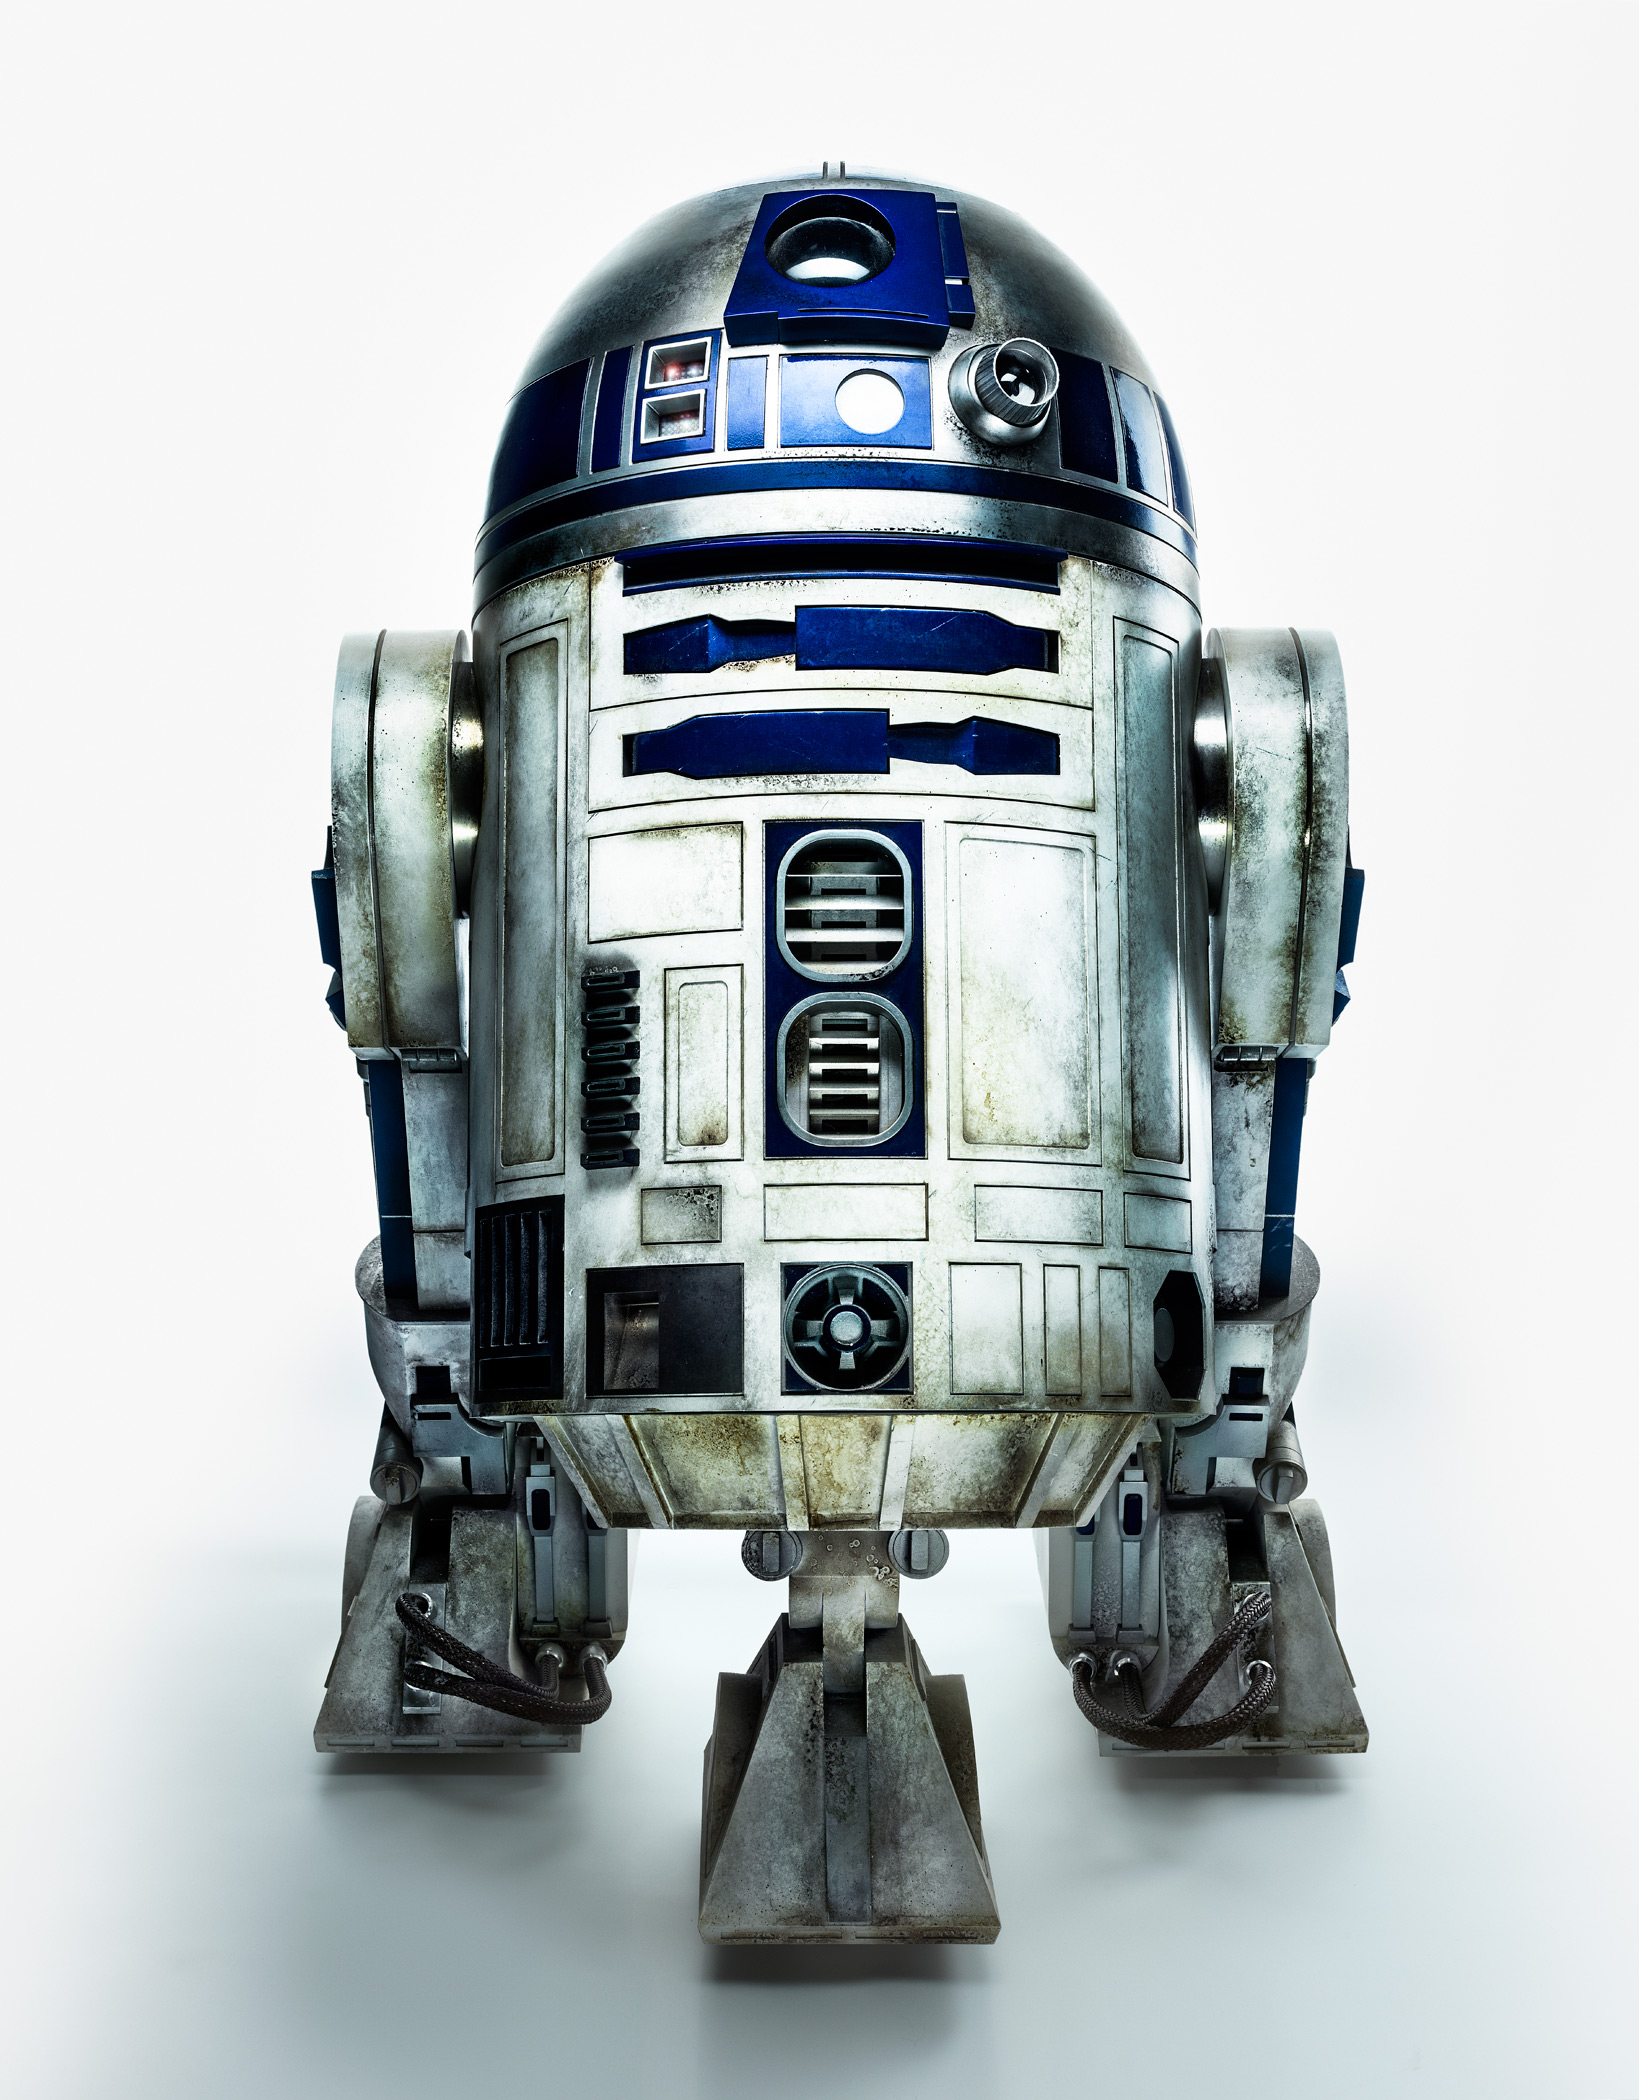 R2D2 photographed for TIME on October 29, 2015 in London.From  Meet the Cast of Star Wars: The Force Awakens